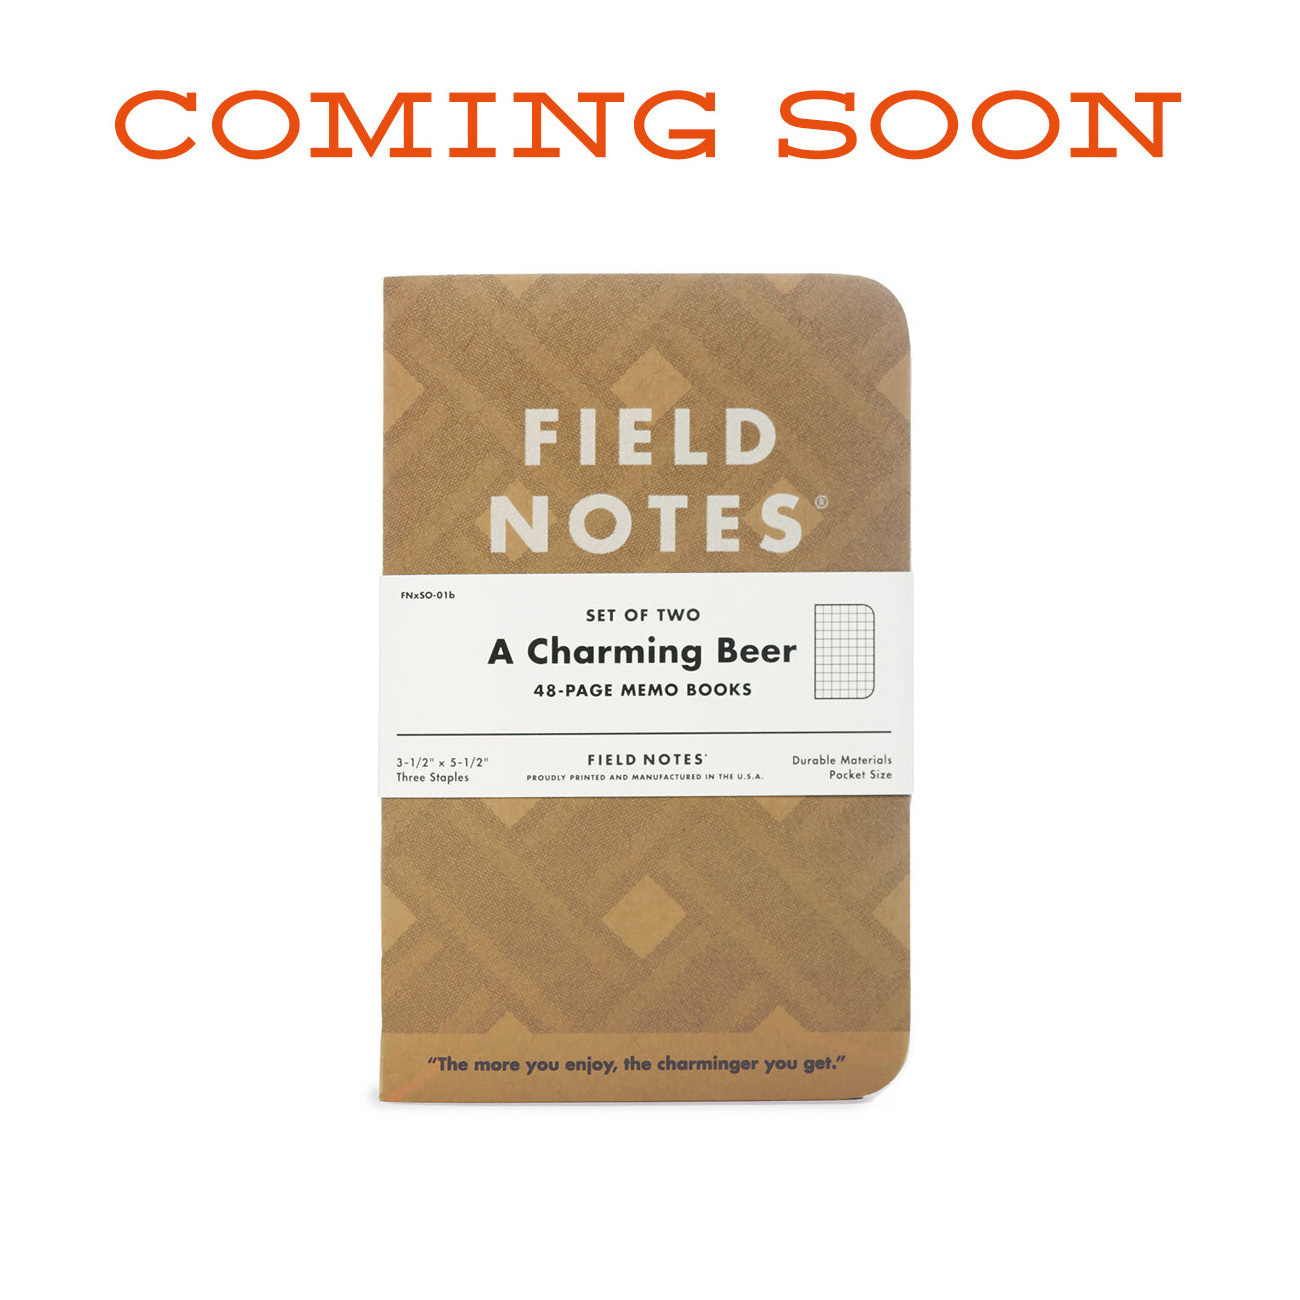 FIELD NOTES – A CHARMING BEER